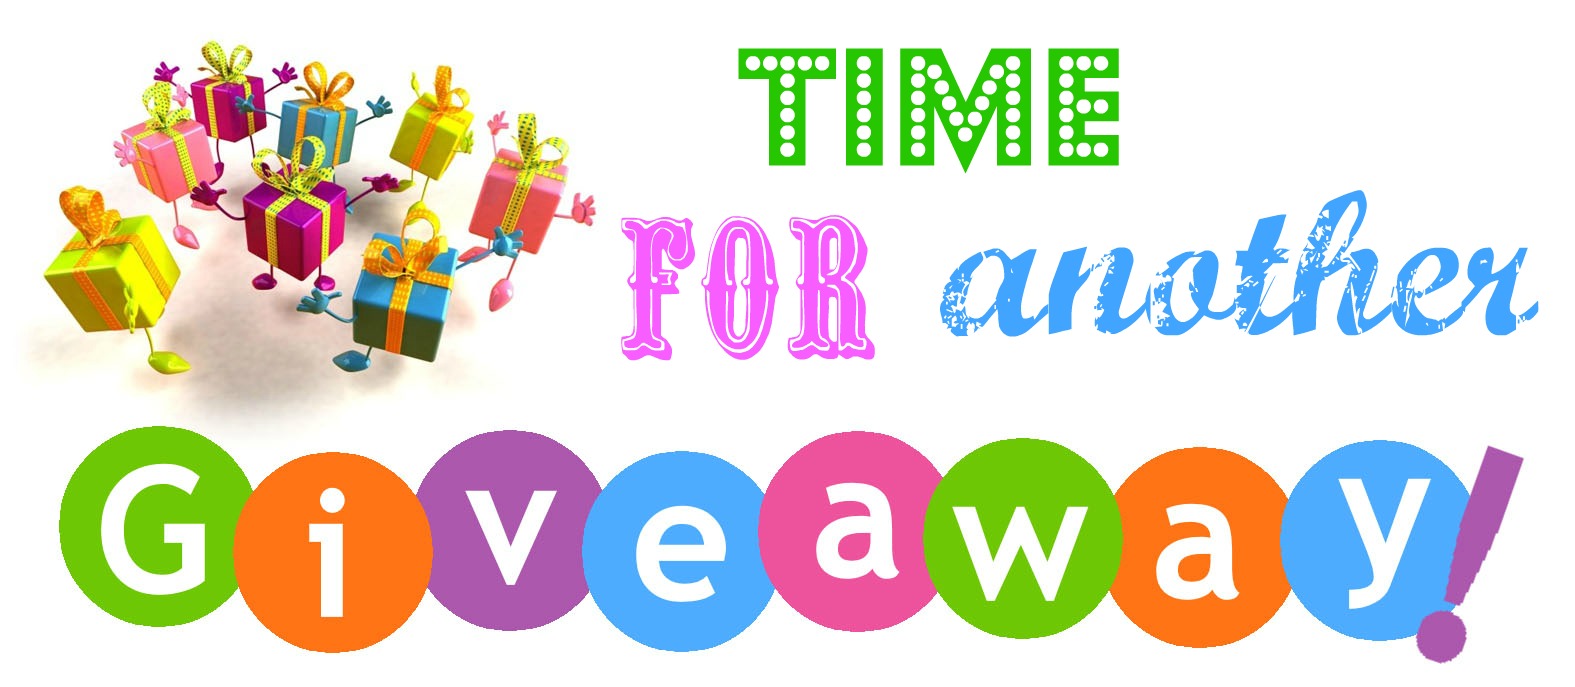 Freebies Samples Deals   Fsd Giveaway Page